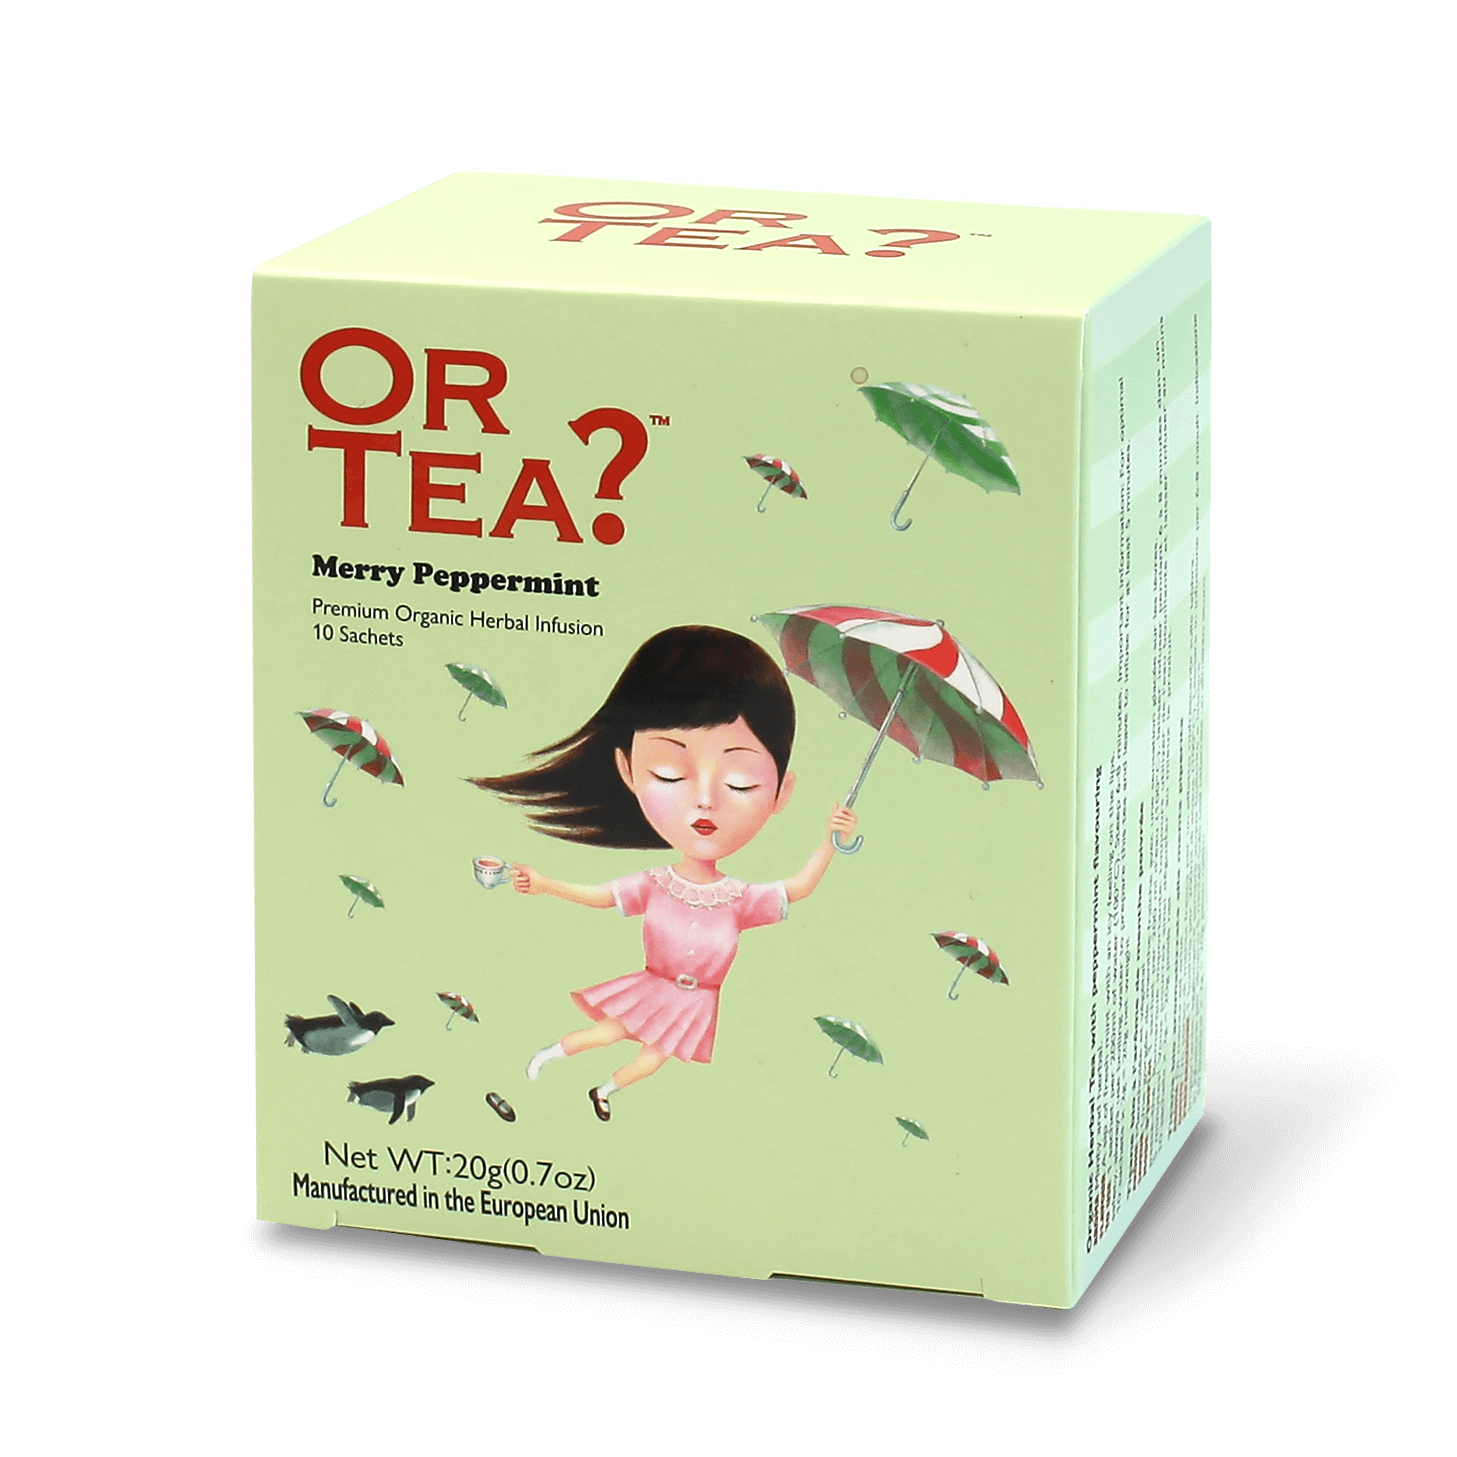 Or Tea 10 sachets in a box merry peppermint